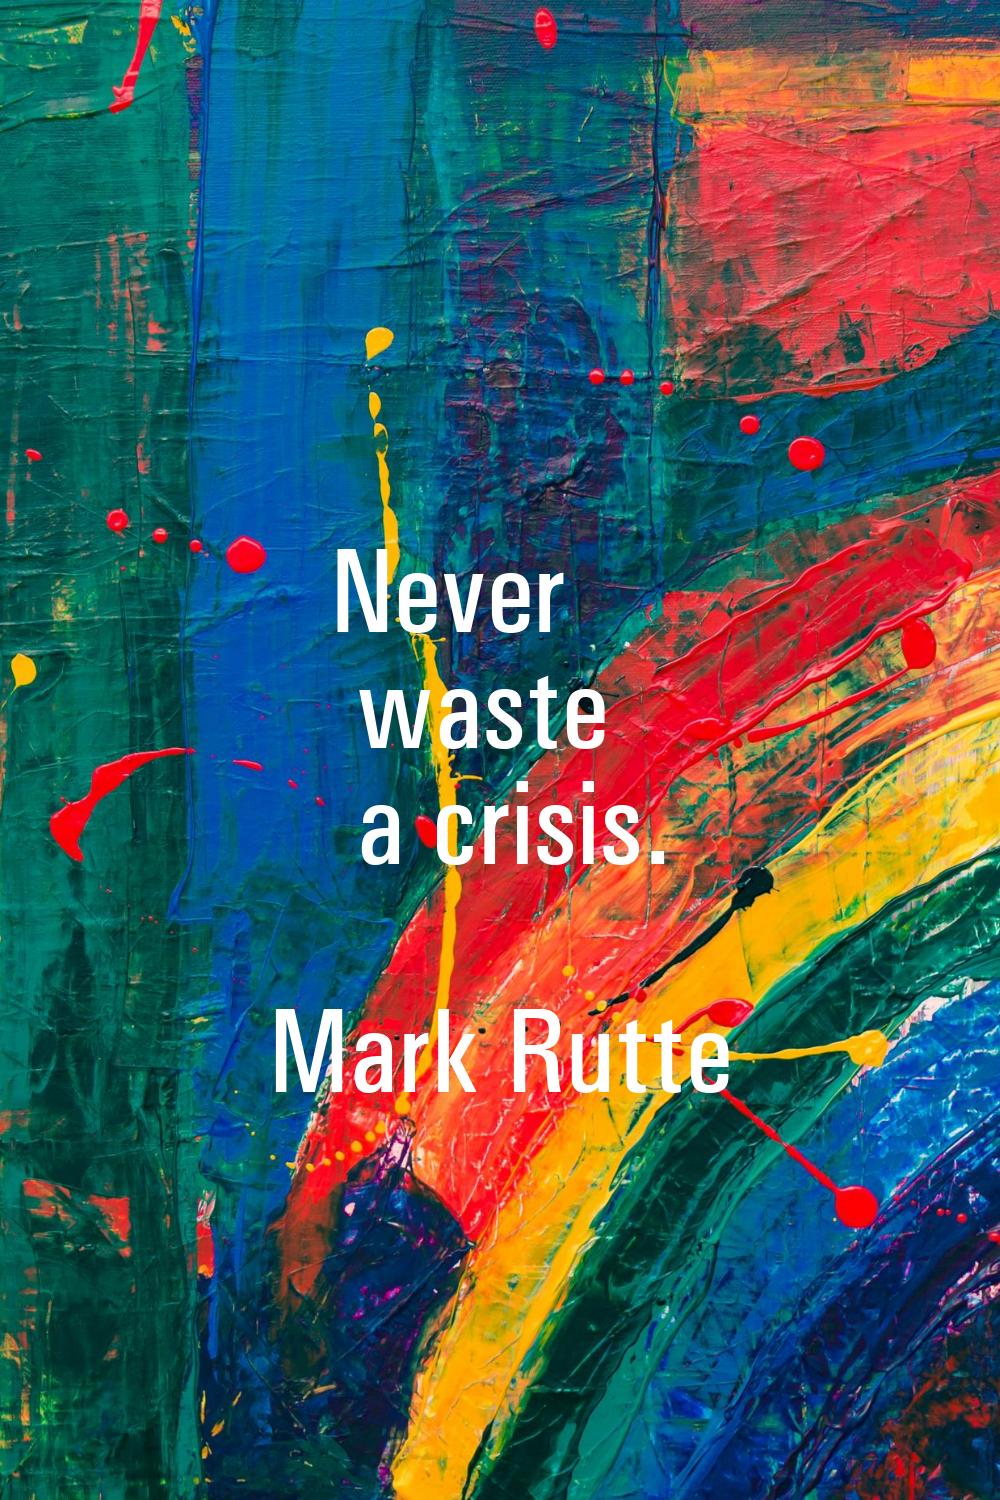 Never waste a crisis.